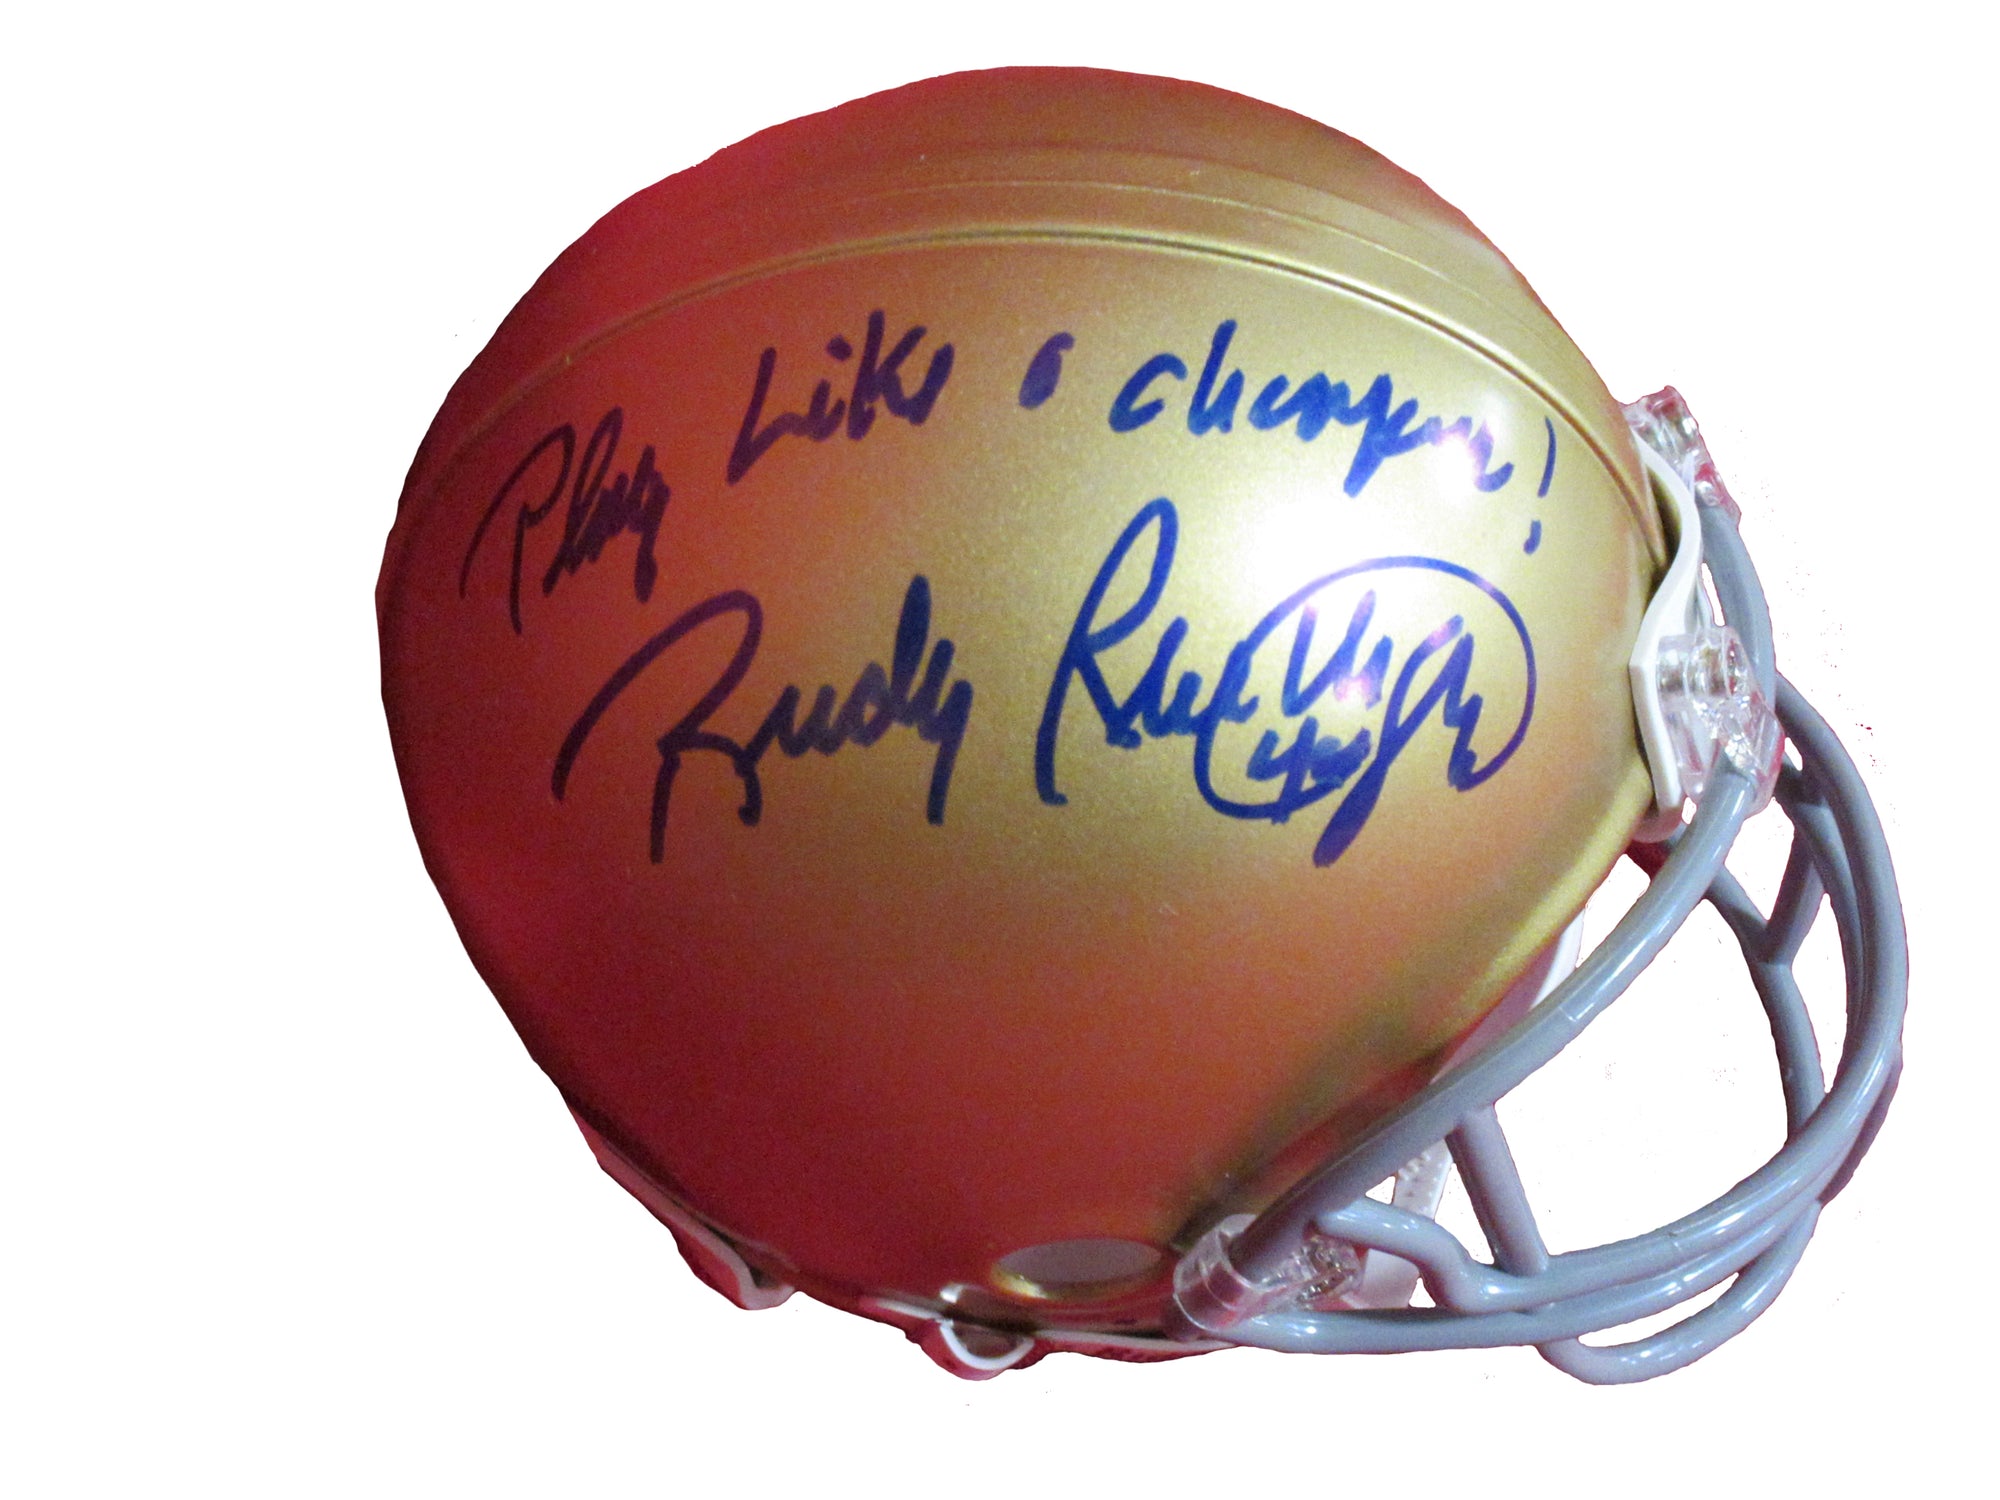 Rudy Ruettiger Notre Dame Autographed Mini-Helmet Inscribed "Play Like a Champion"